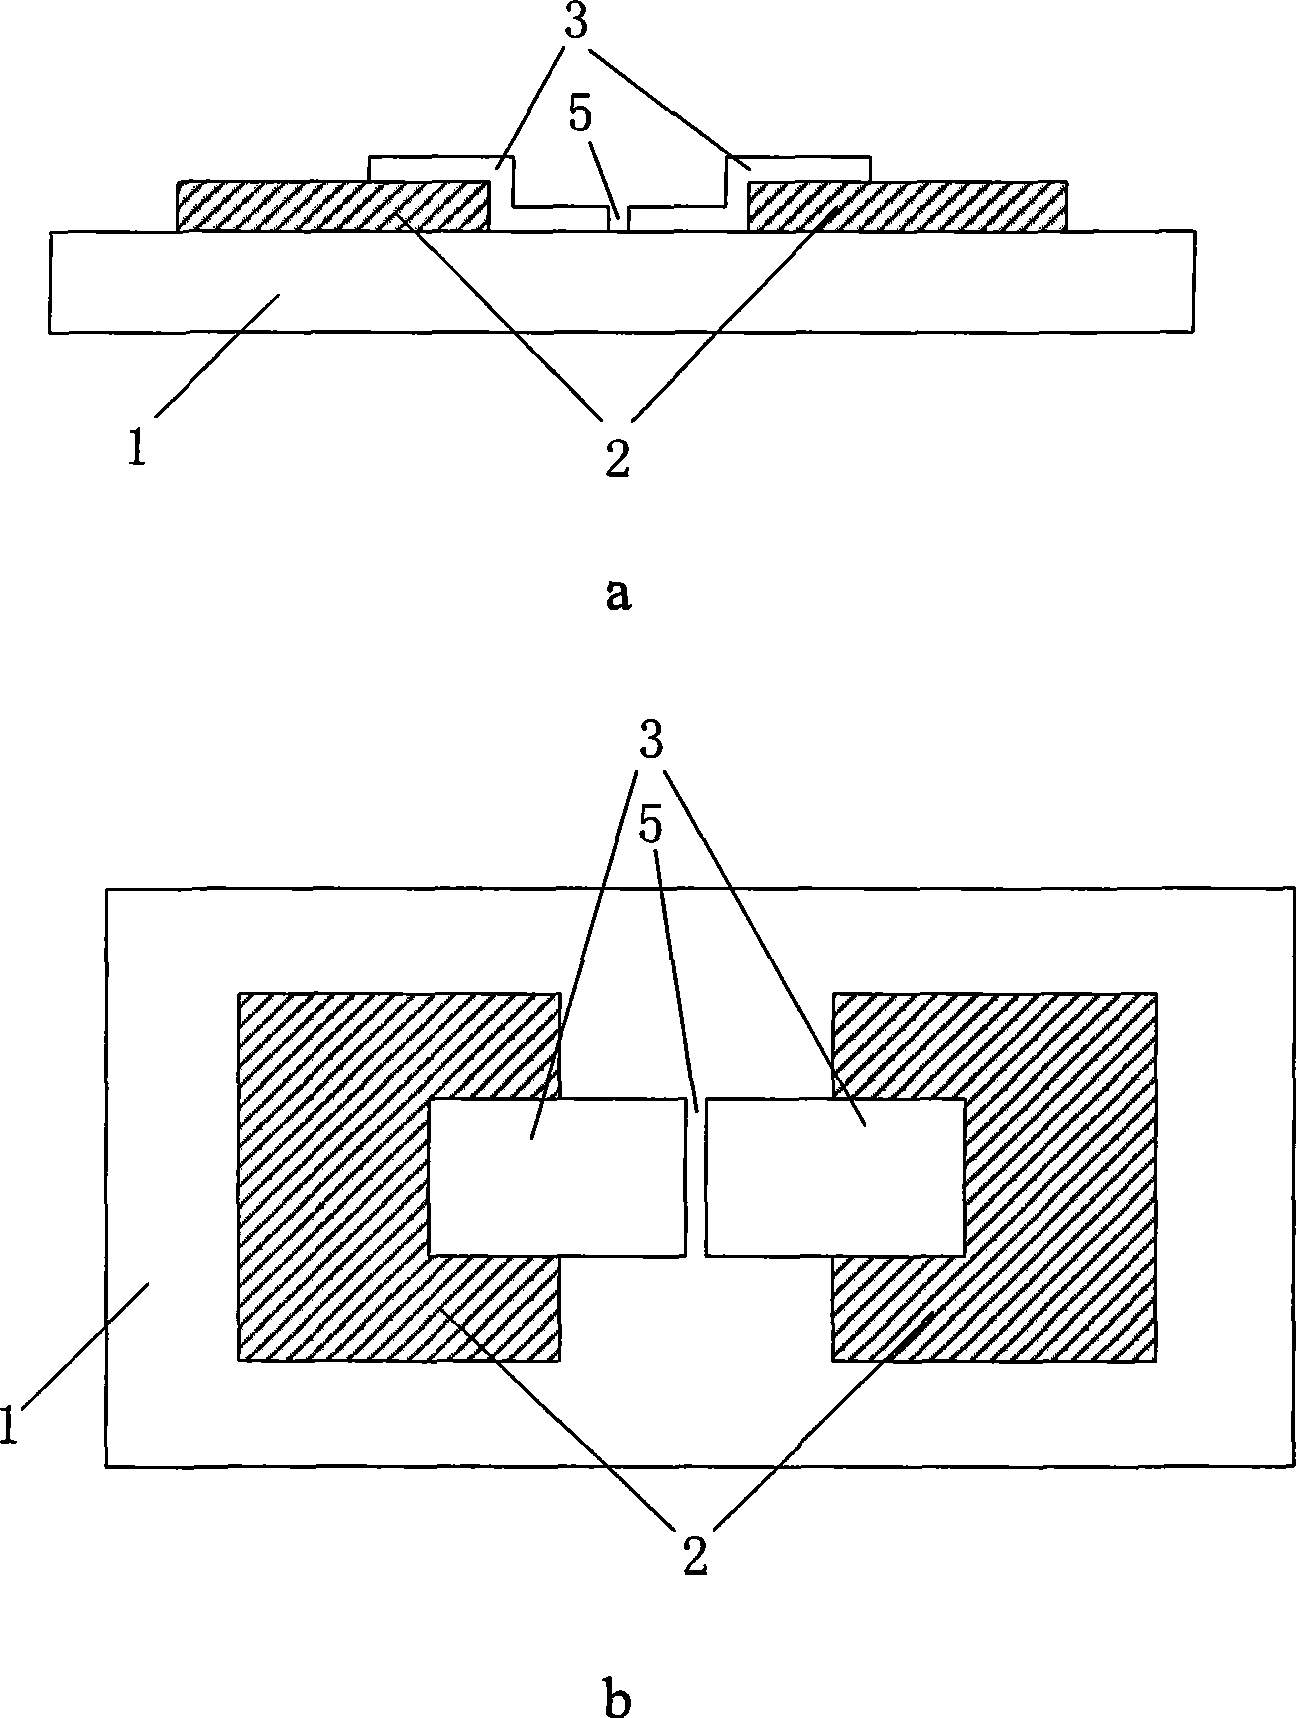 Construction of surface conductive field emission electronic source conductive film